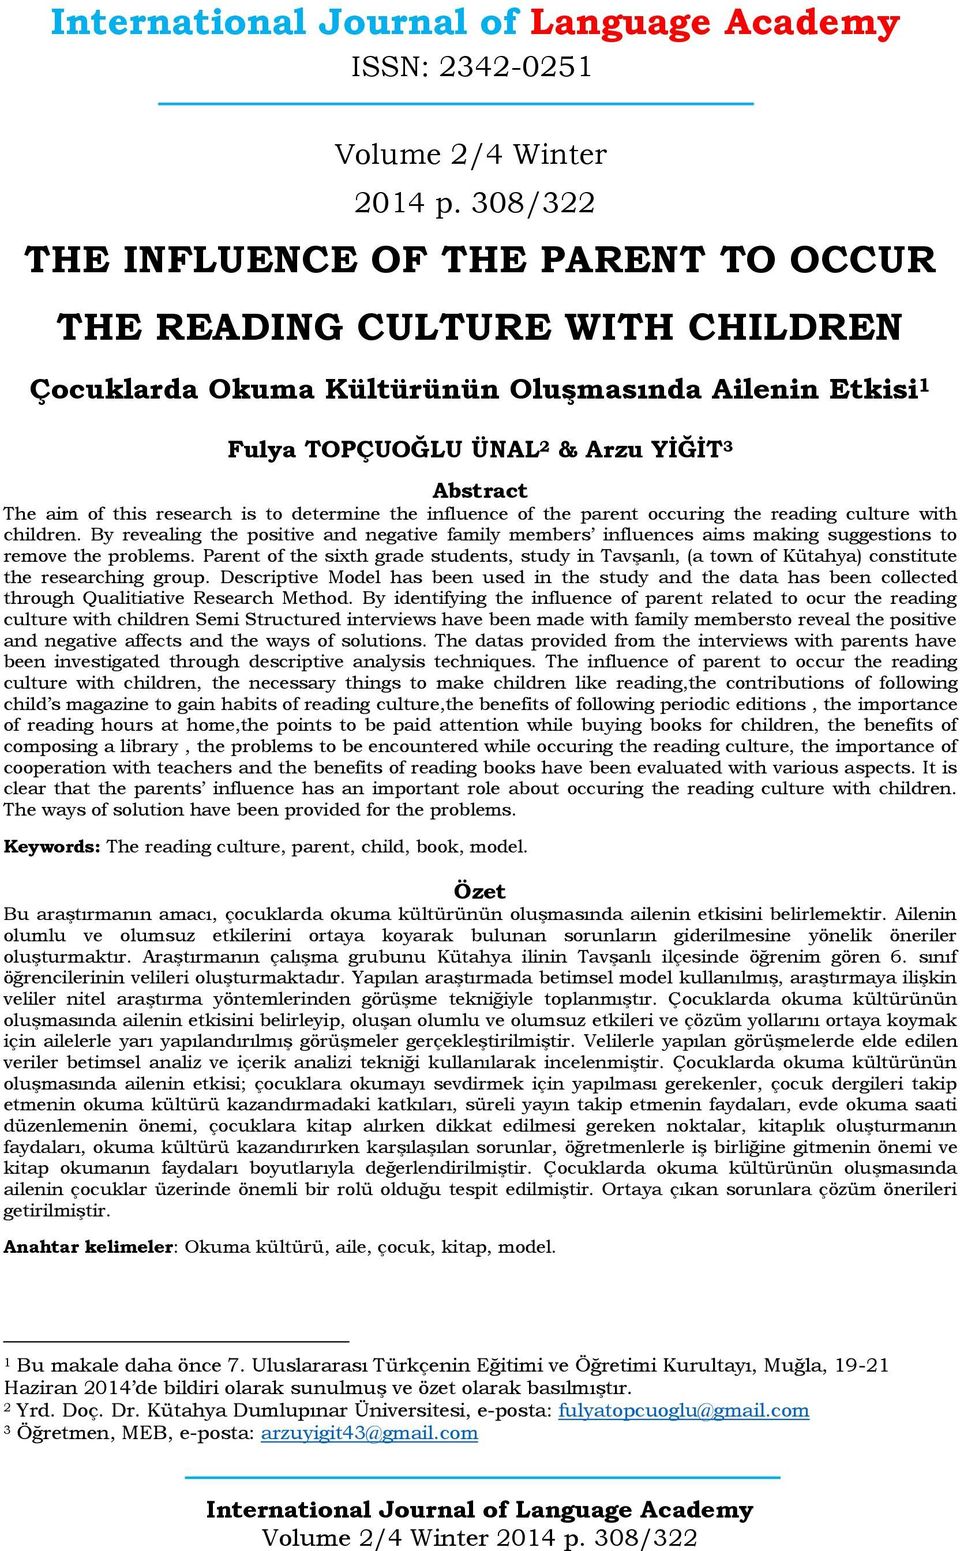 research is to determine the influence of the parent occuring the reading culture with children.